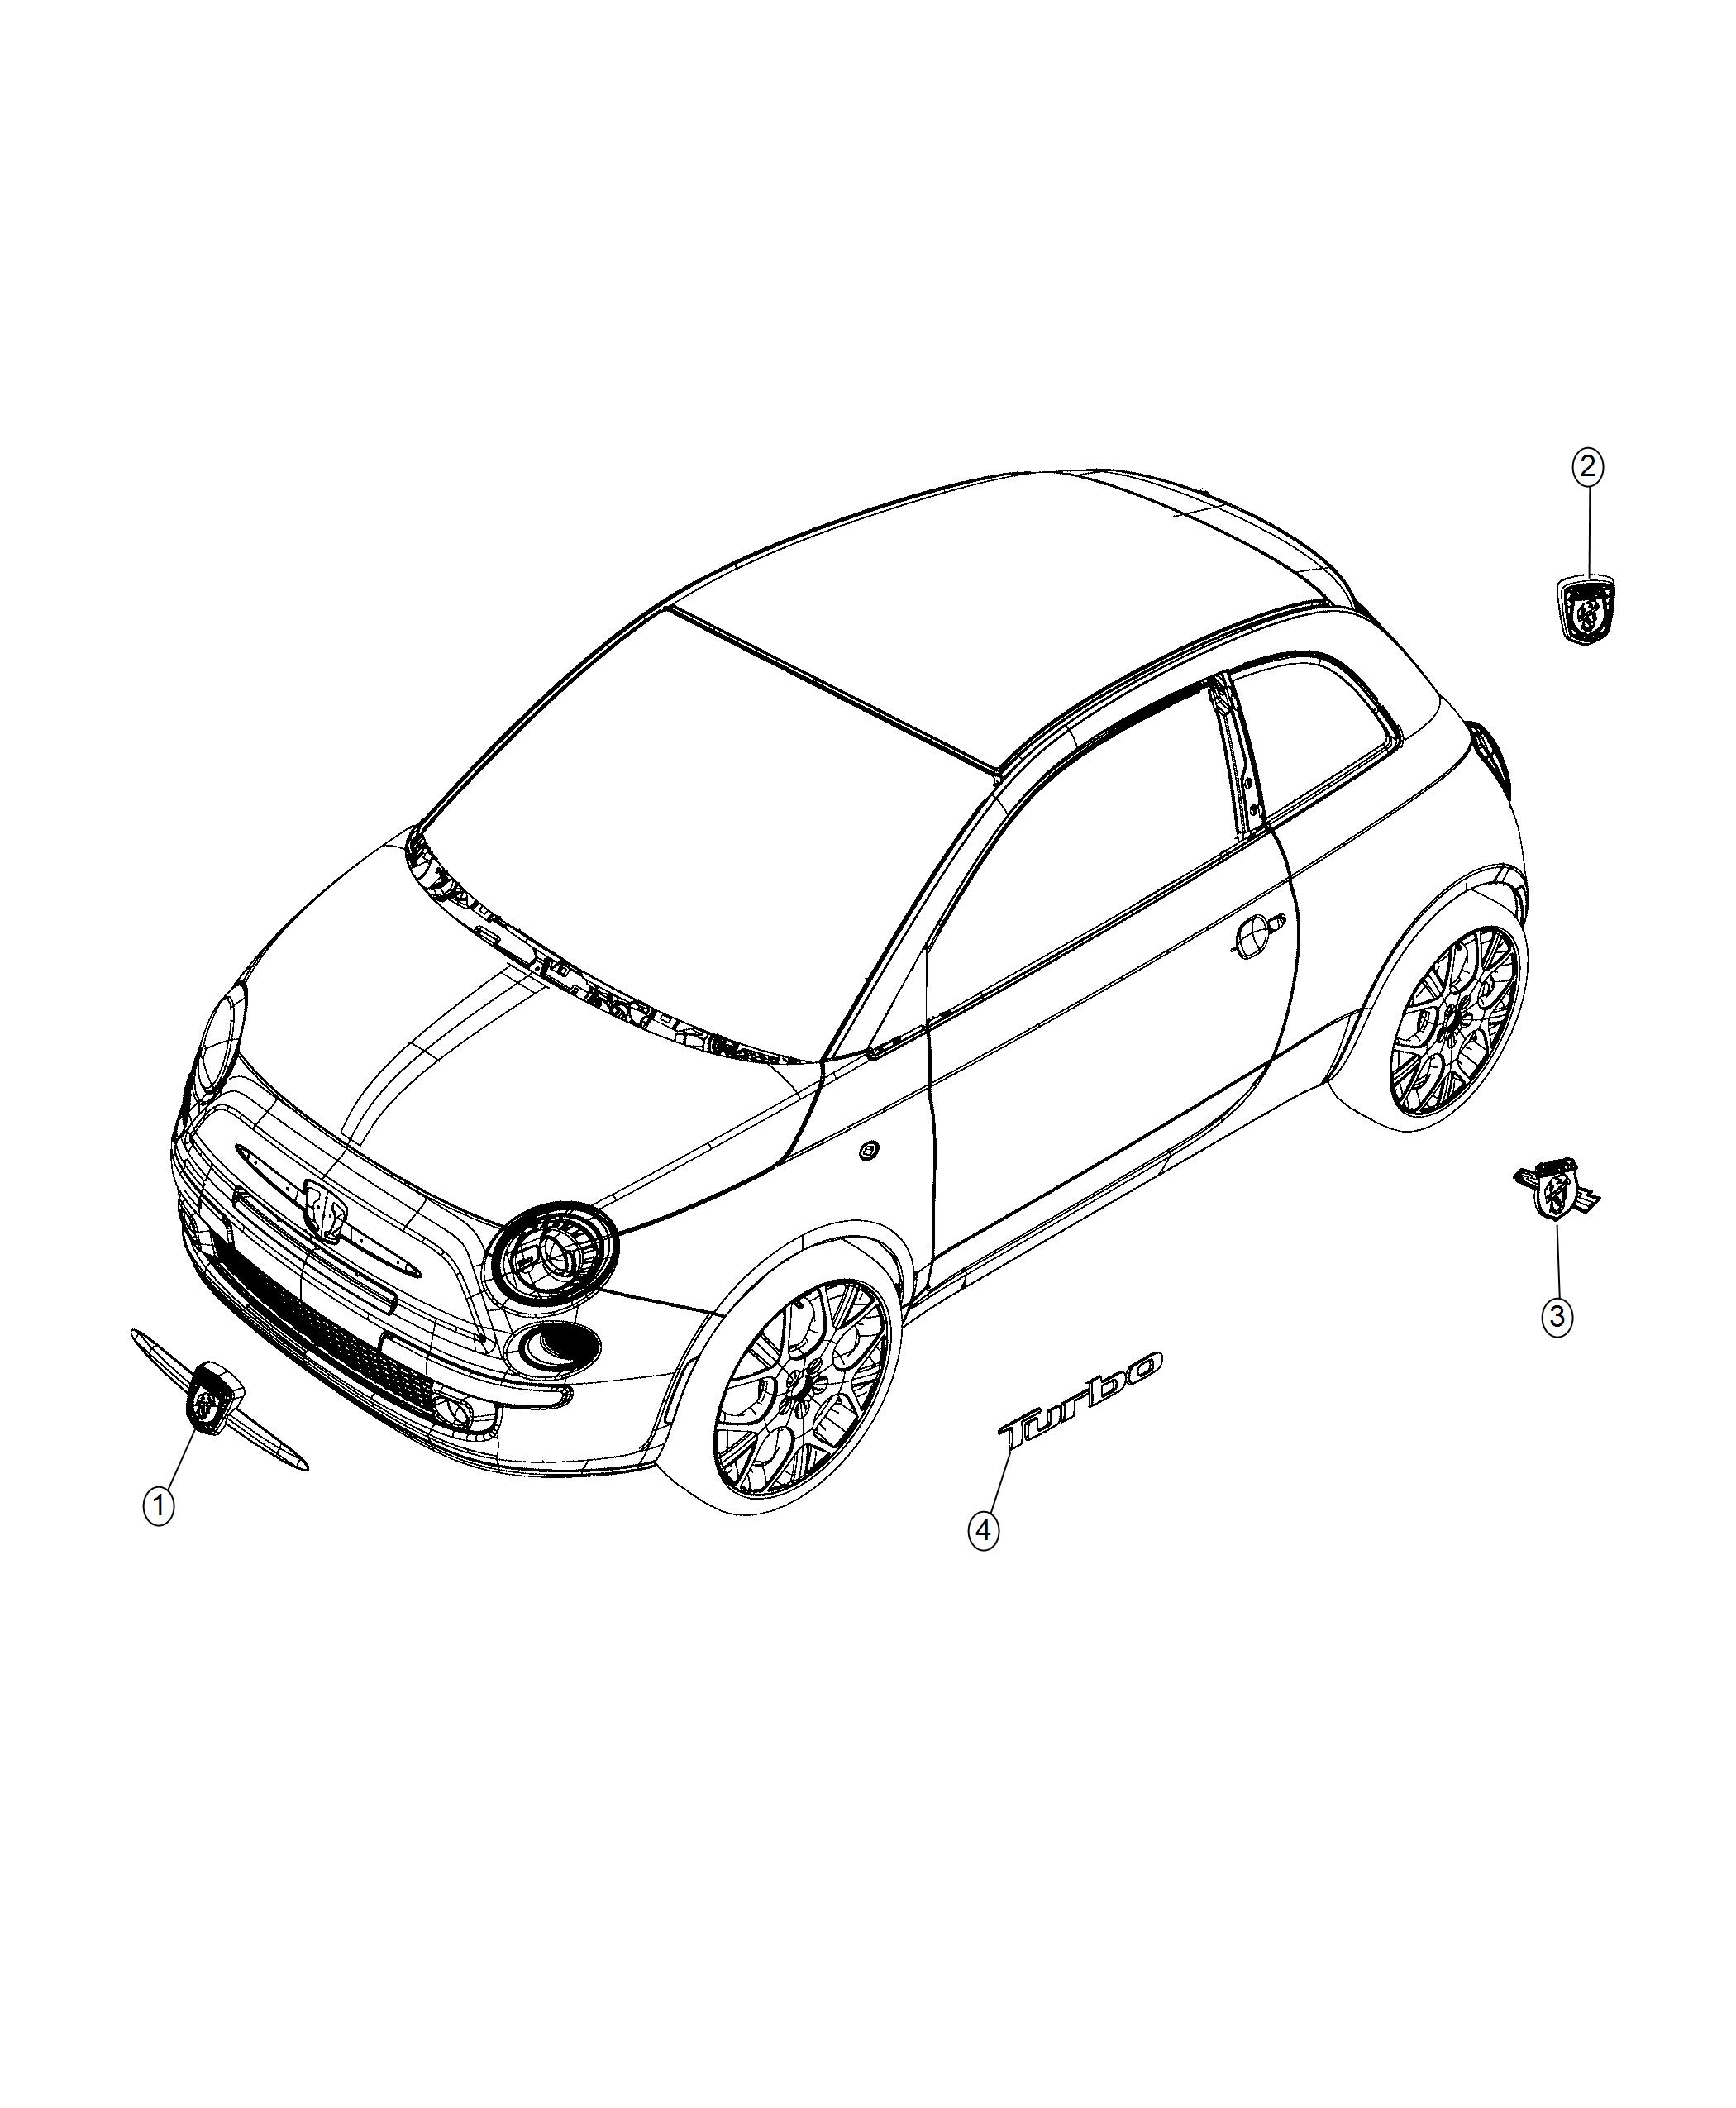 Abarth Package. Diagram